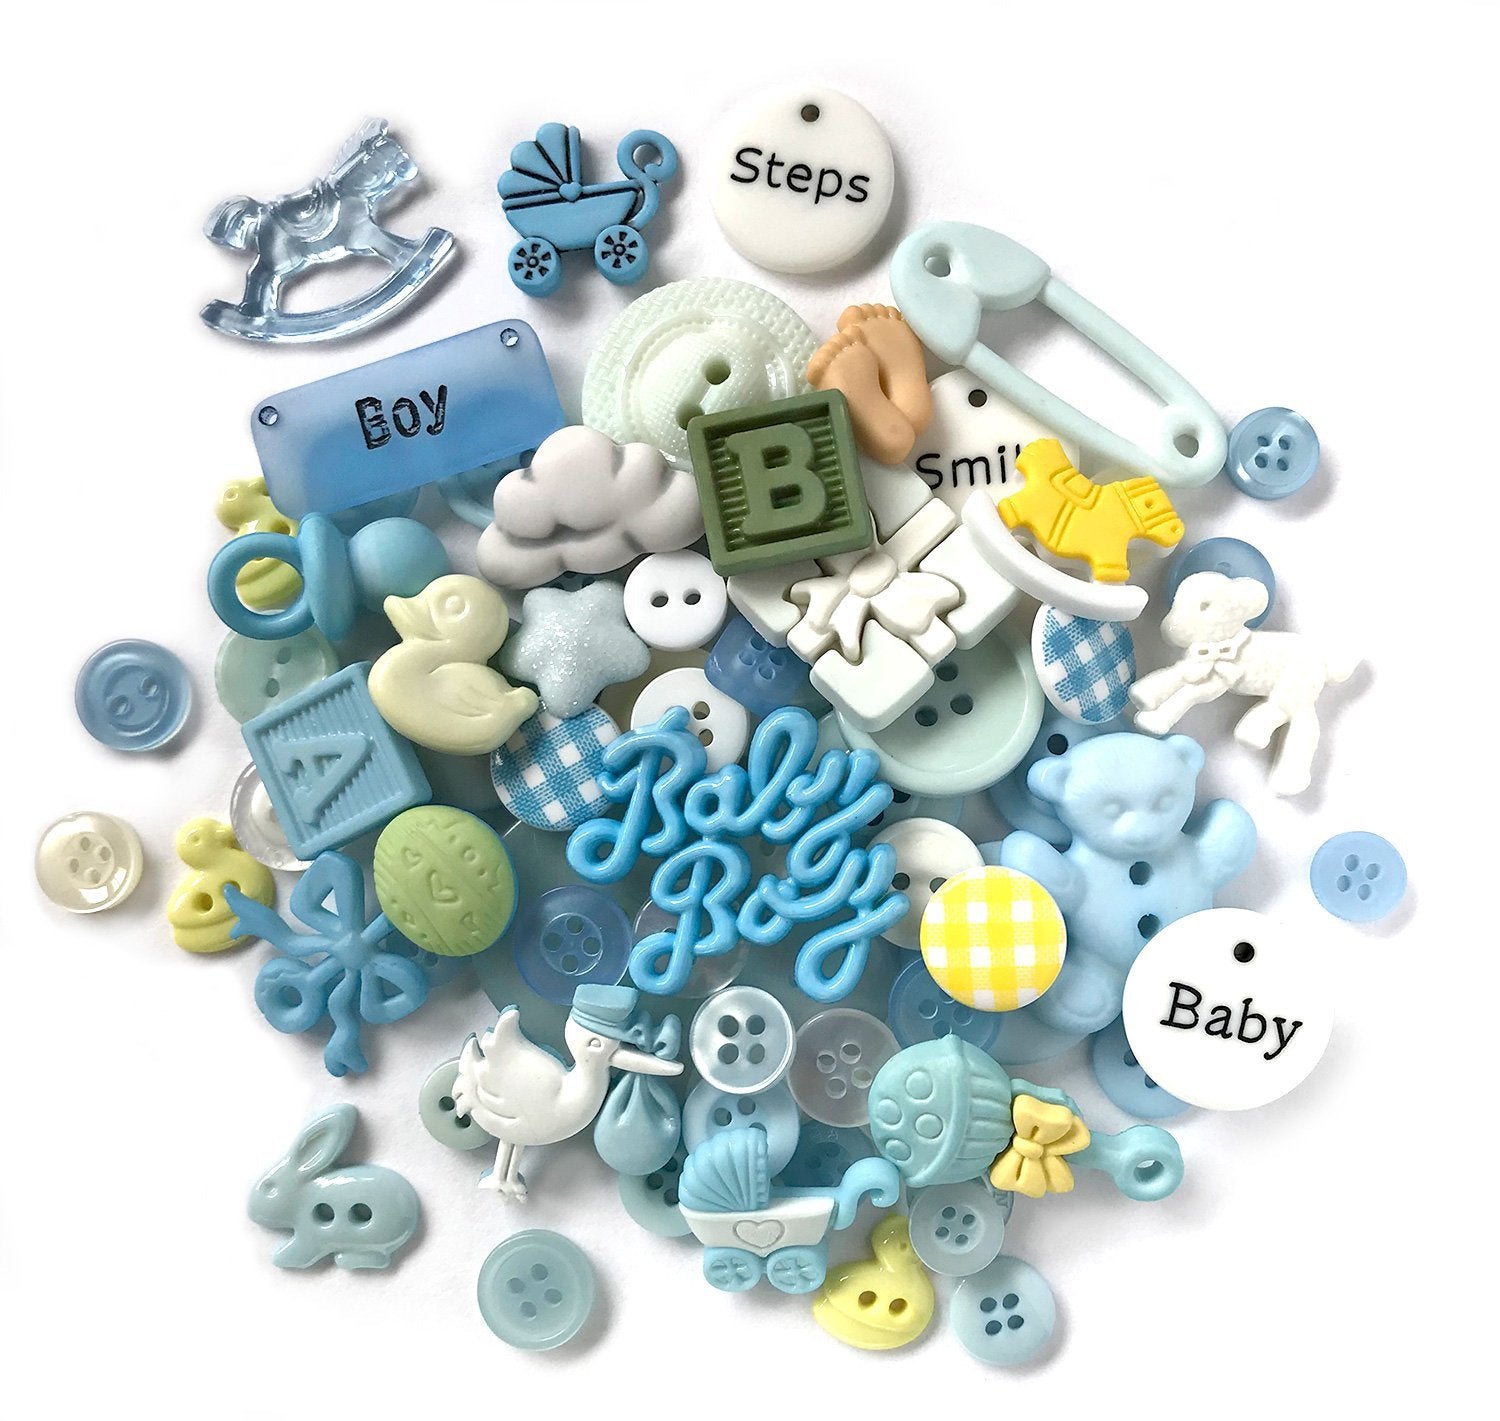 Baby Boy-VP324 - Buttons Galore and More